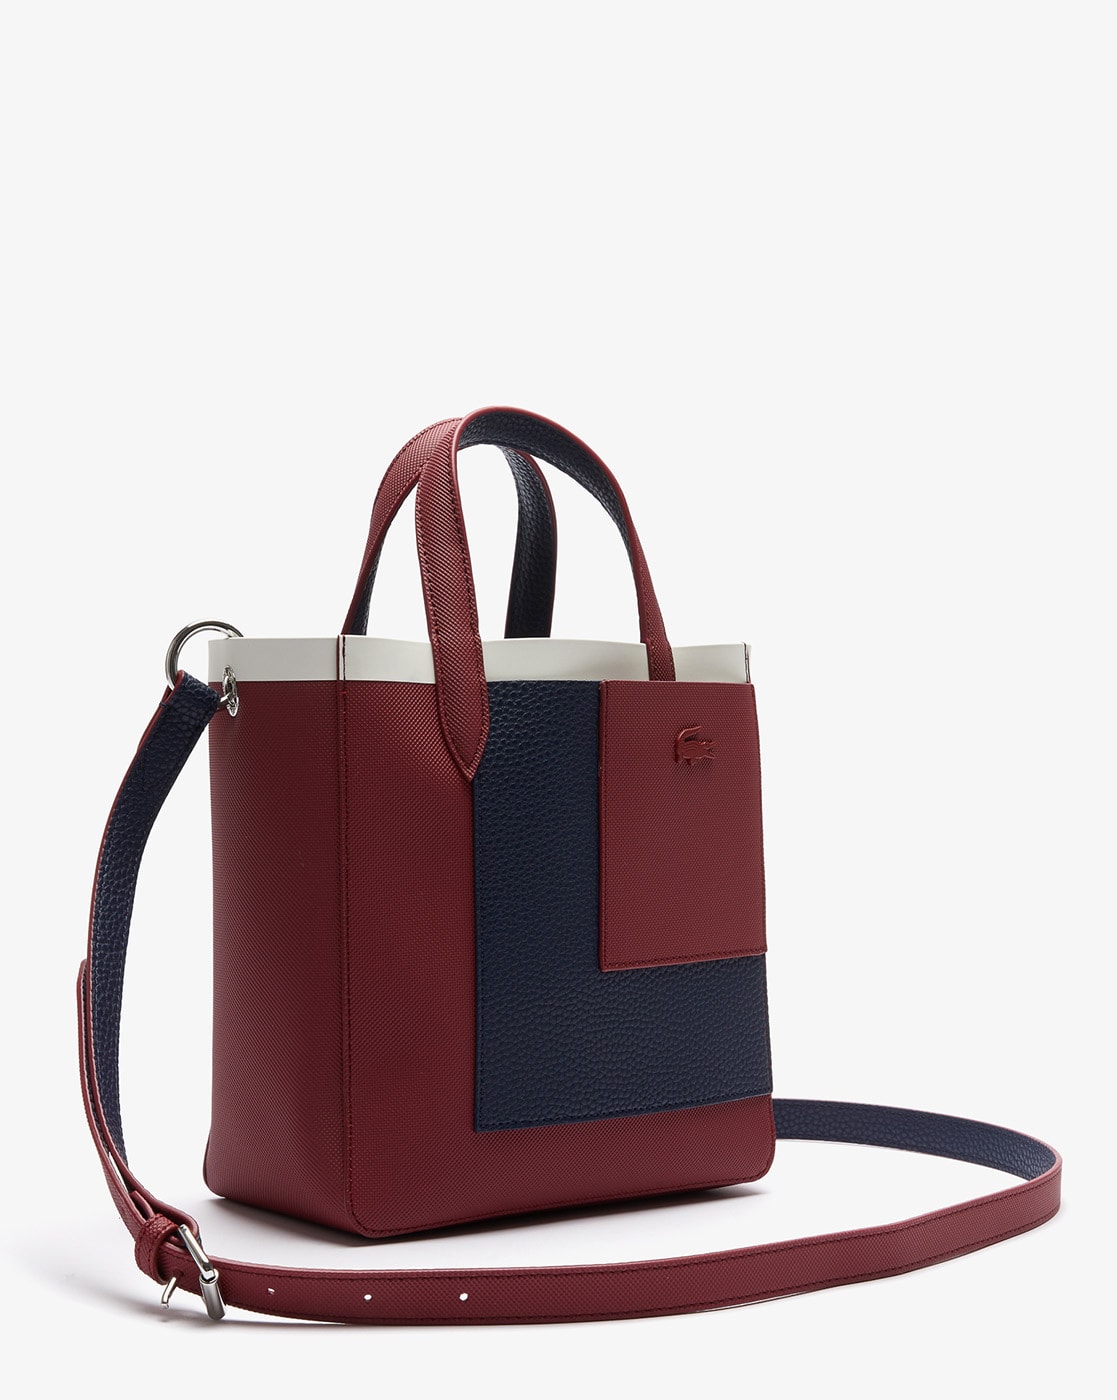 Lacoste Fabric Tote Bags